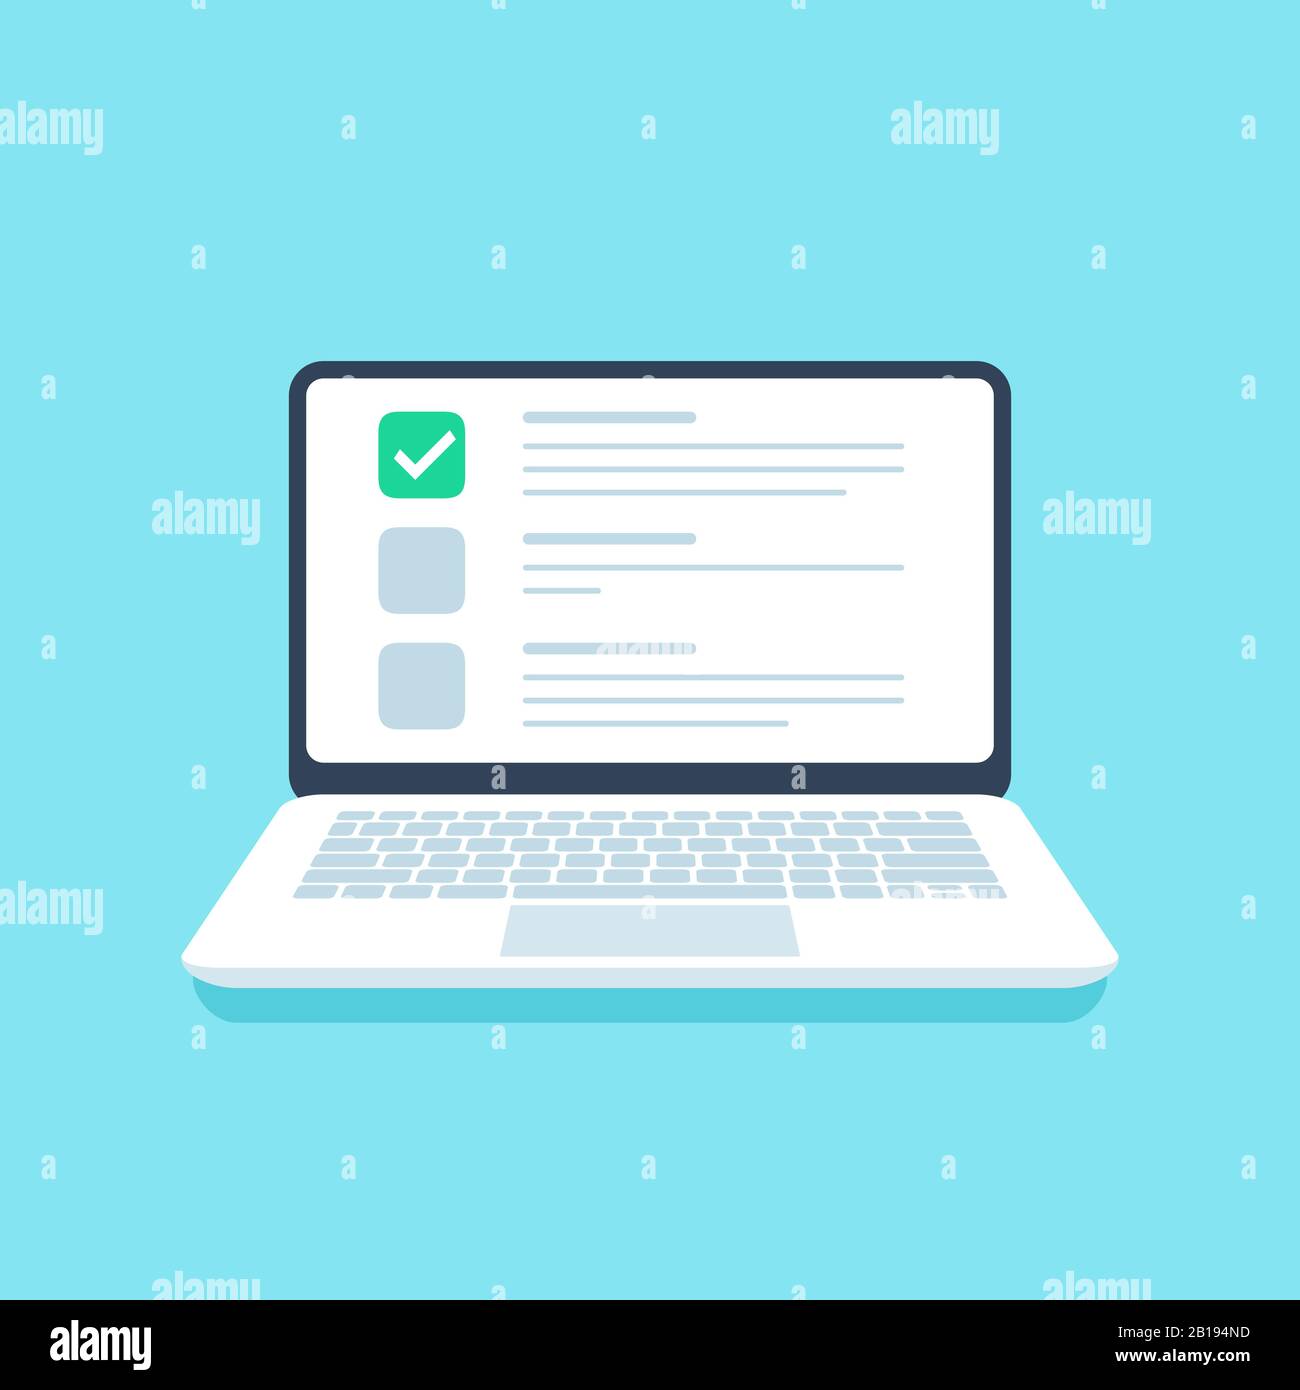 Online quiz checklist. Web exam, options choice on laptop screen and questionnaire checklists vector illustration Stock Vector